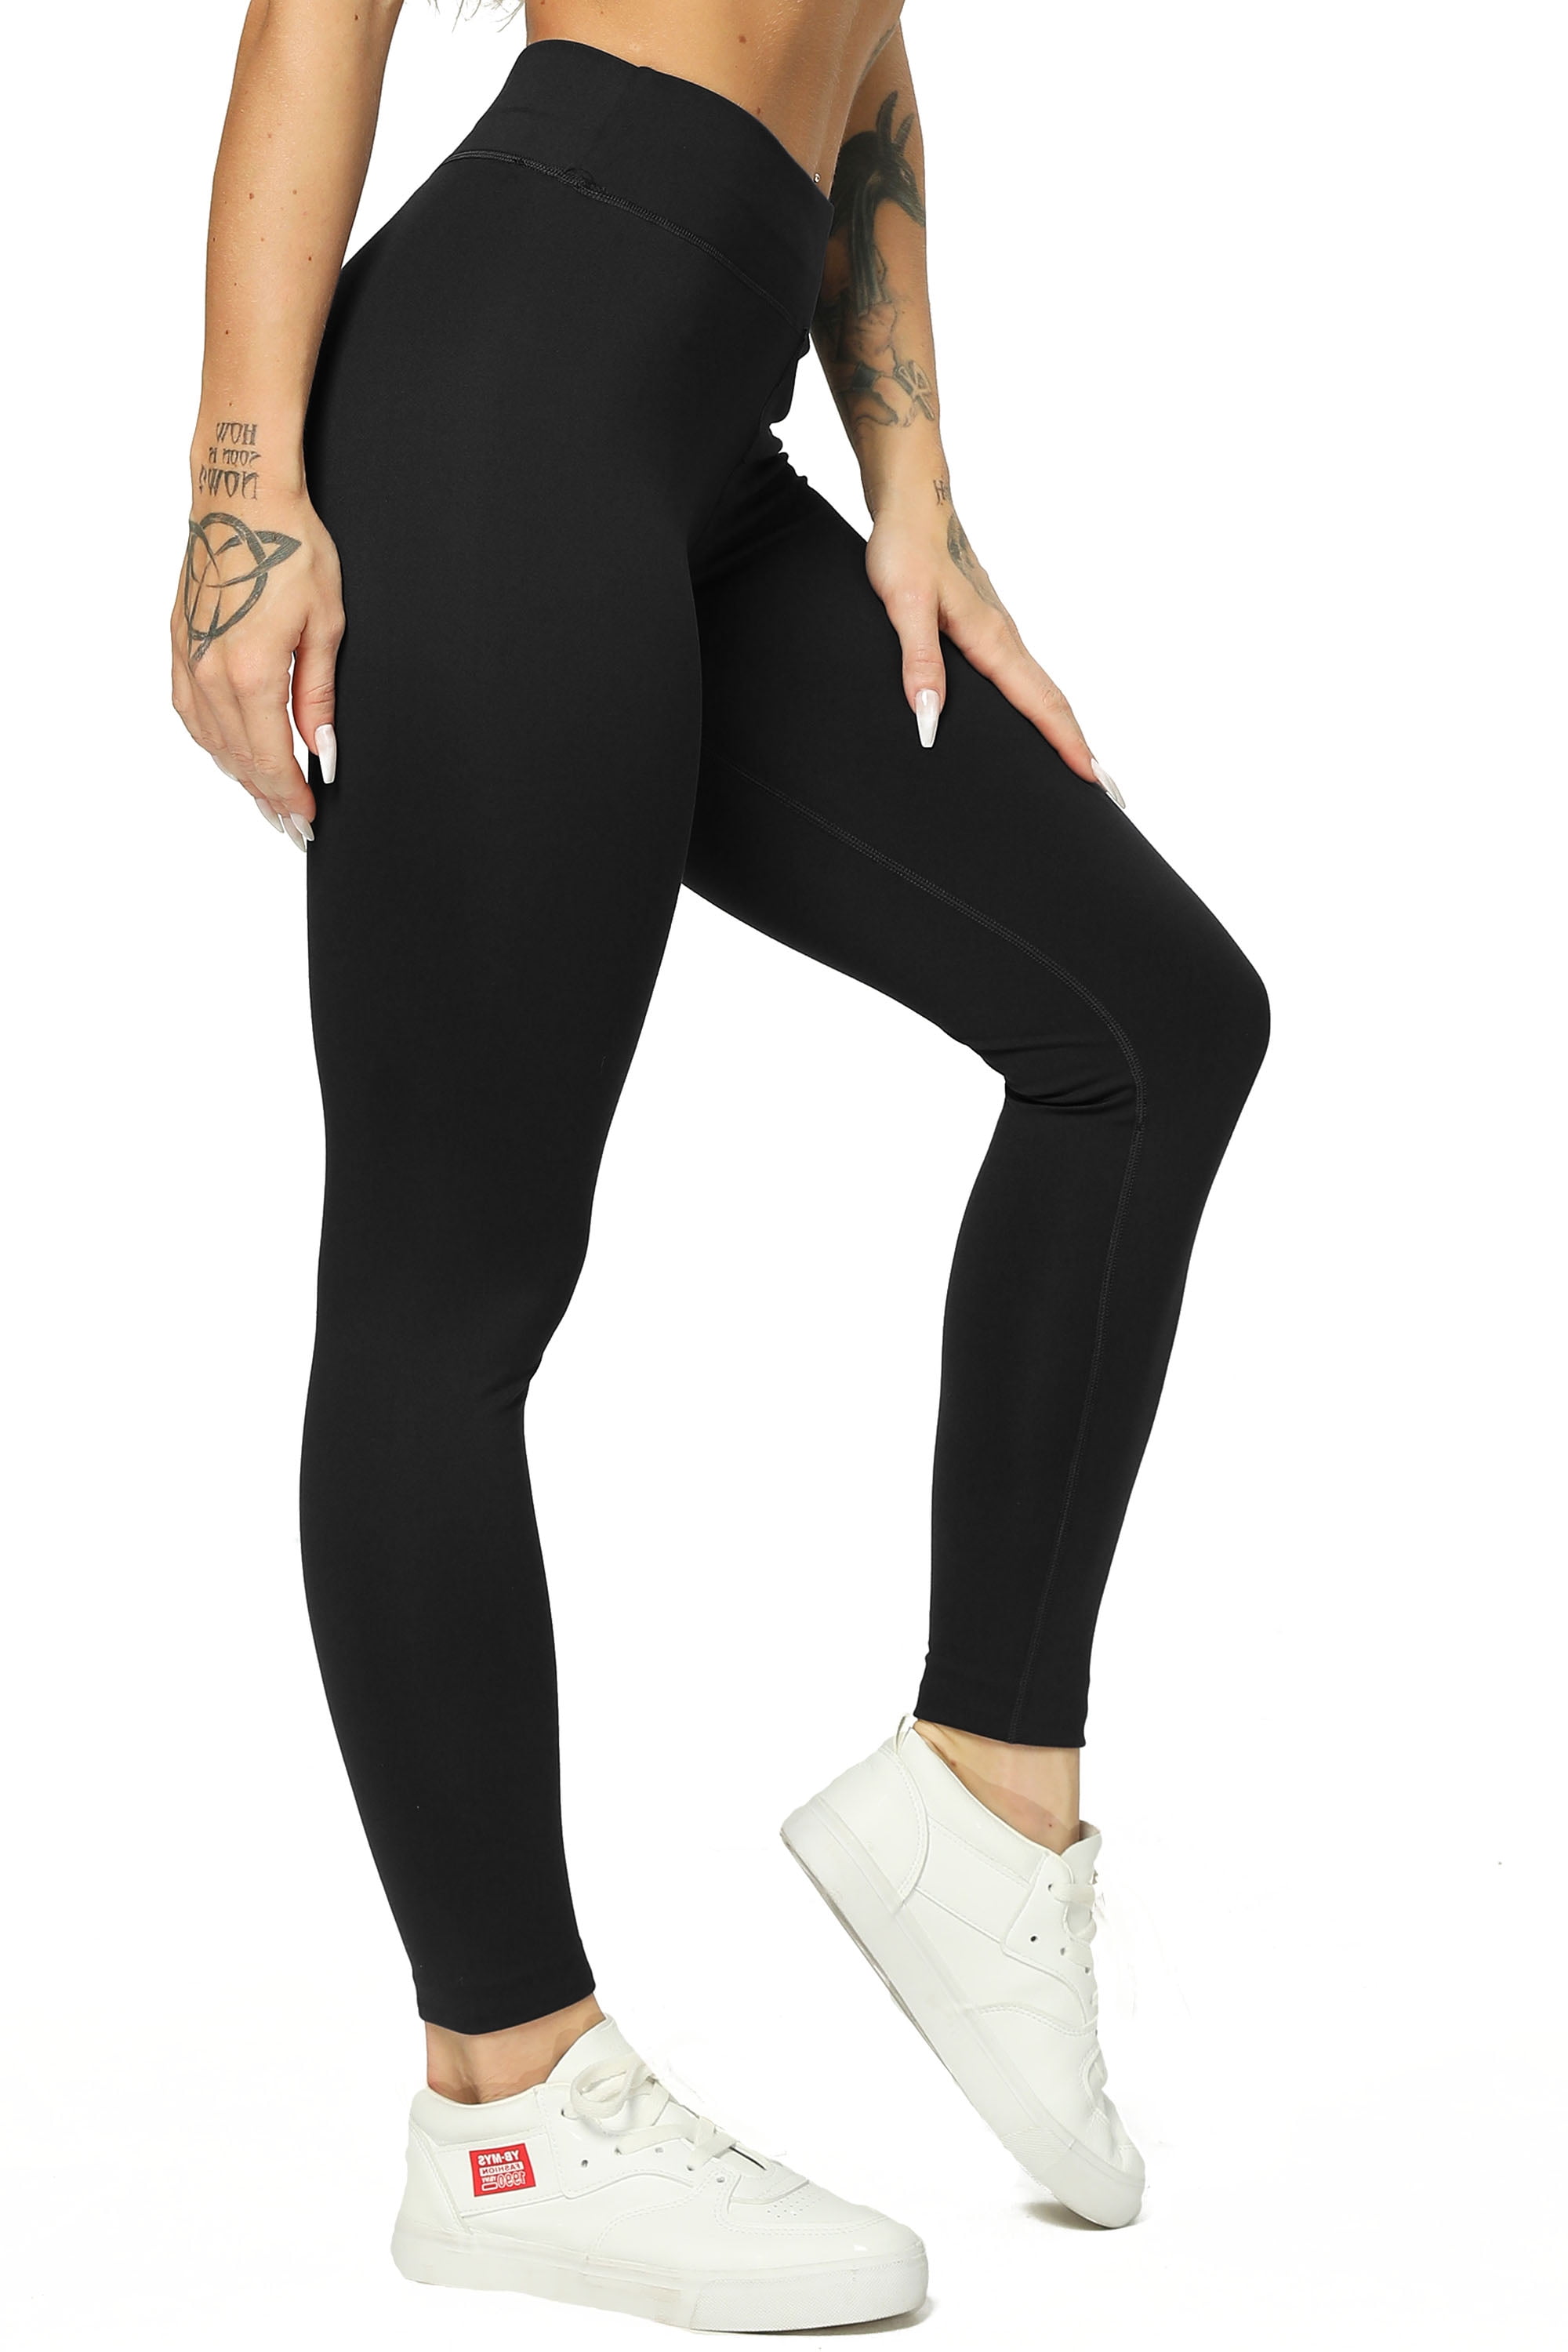 HLTPRO Leggings with Pockets for Women(Reg & Plus Size) - High Waist Tummy  Control Yoga Pants with Pockets for Workout White price in UAE,  UAE